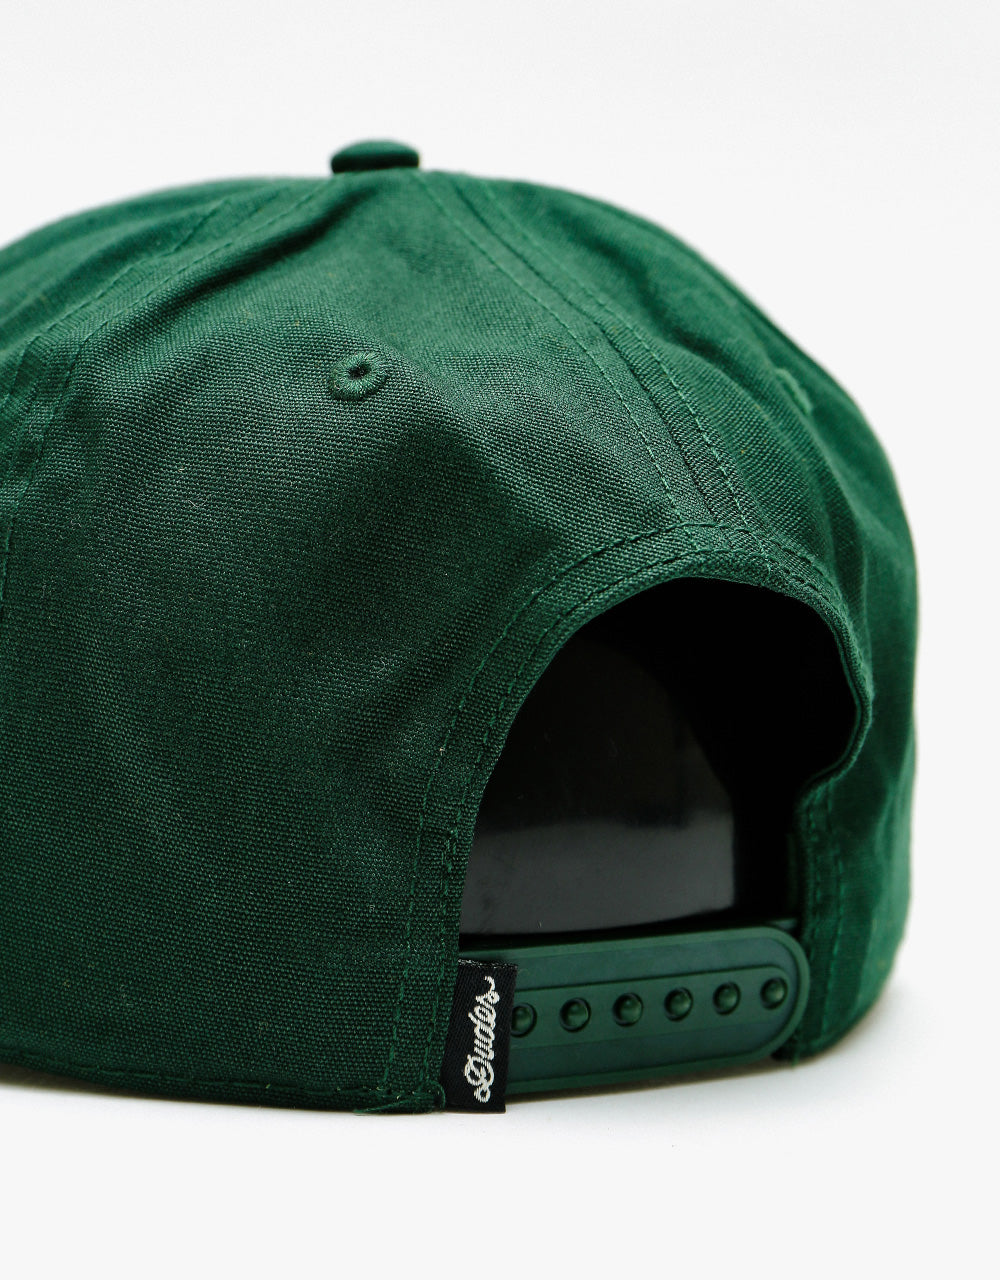 The Dudes Early Retirement 6 Panel Snapback Cap - Duck